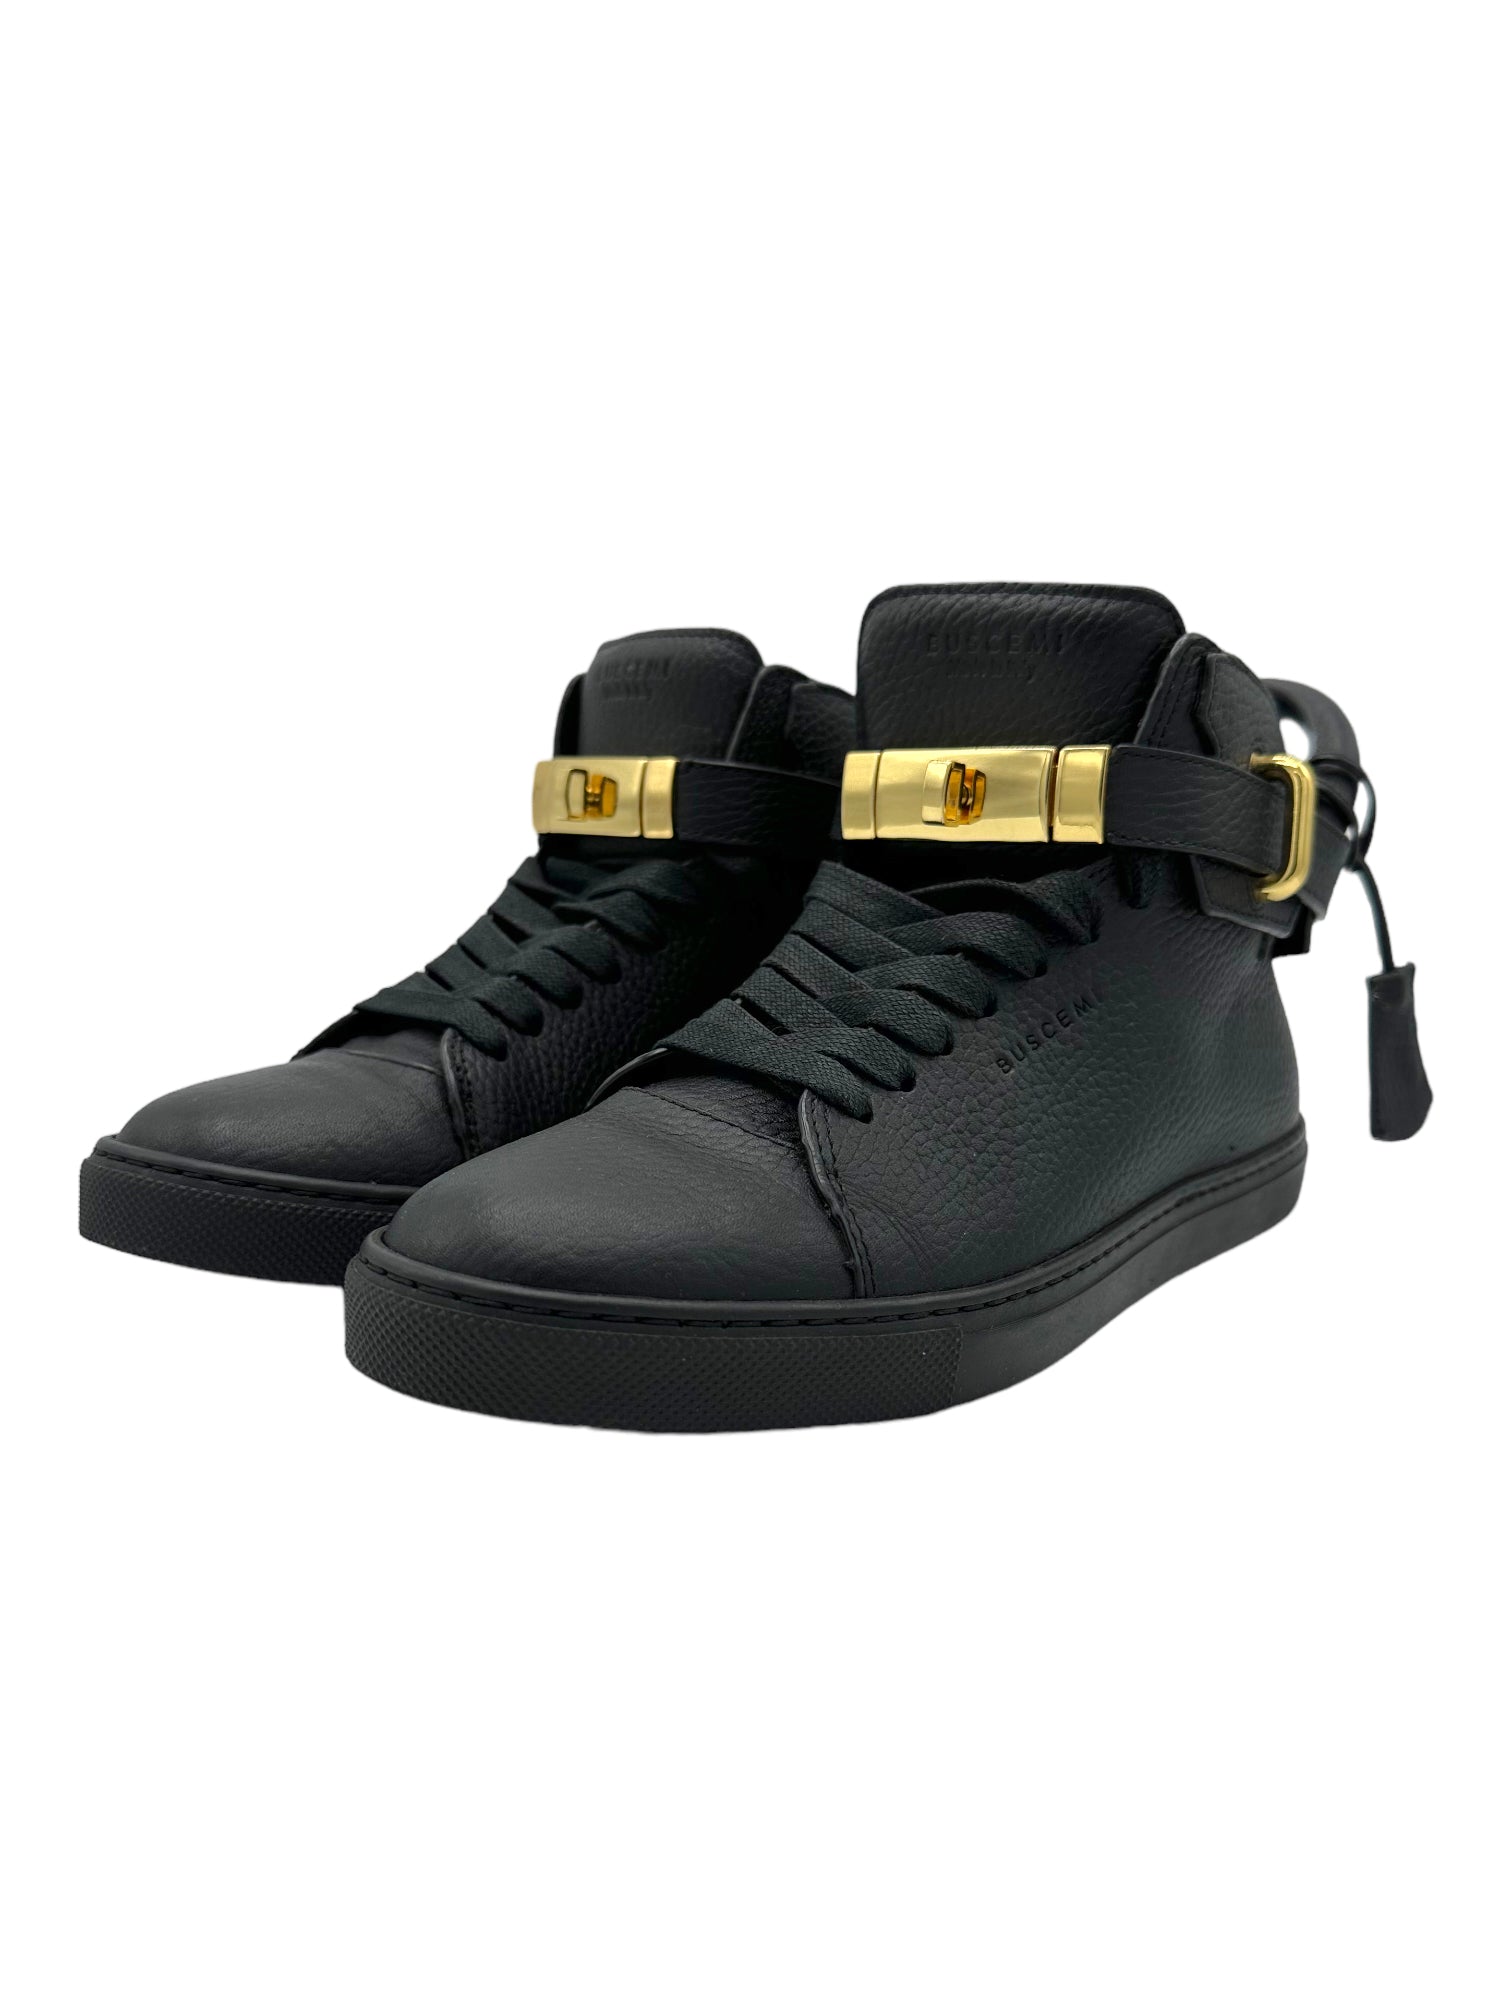 Buscemi Black 100MM High-Top Leather Sneaker - Genuine Design Luxury Consignment for Men. New & Pre-Owned Clothing, Shoes, & Accessories. Calgary, Canada